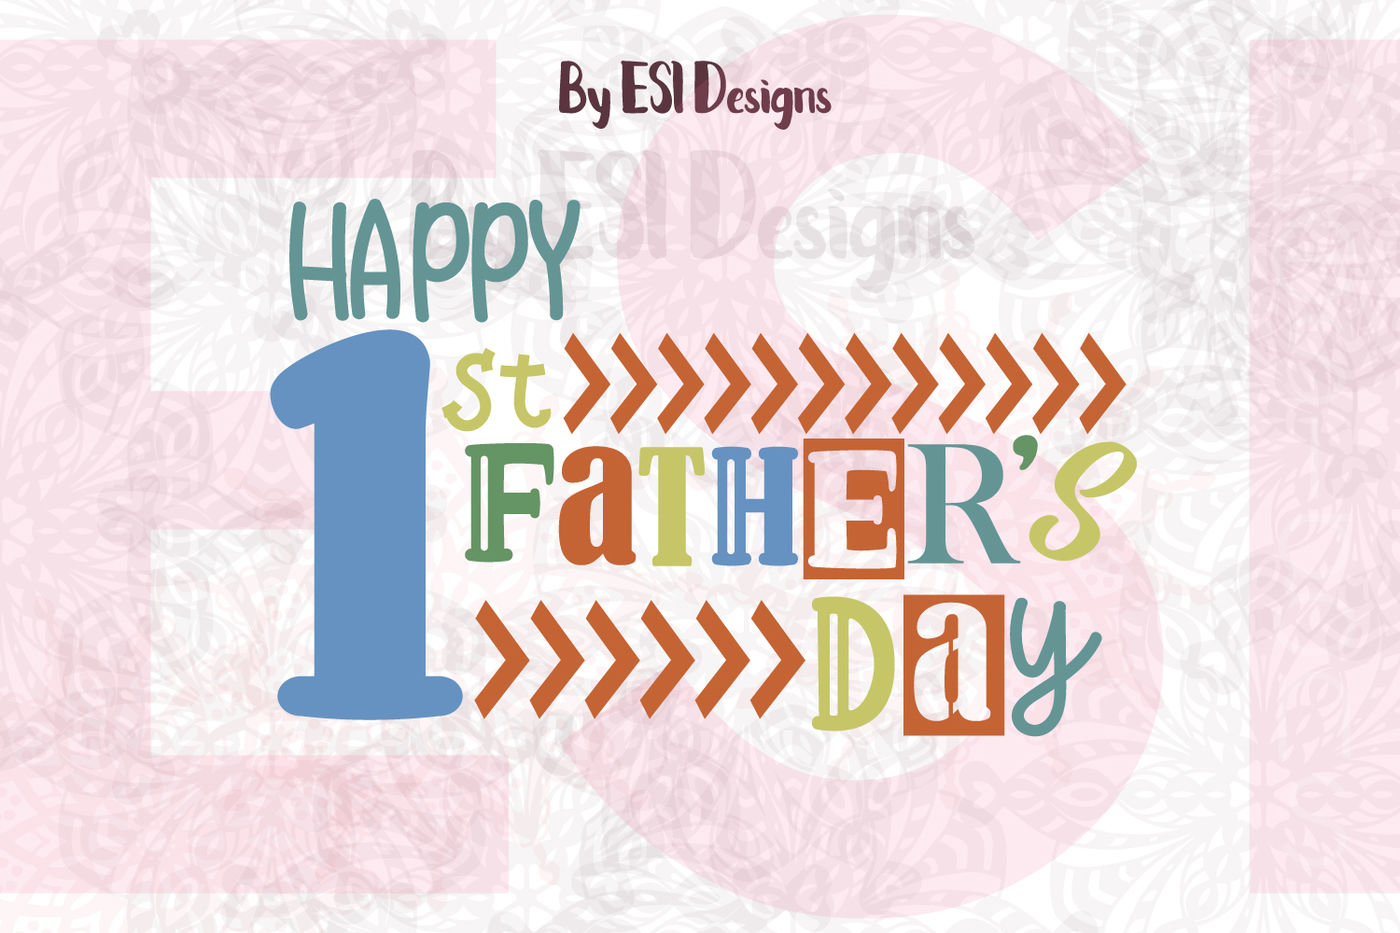 Download Happy 1st Father S Day Quote Design Svg Dxf Eps Png Cut File By Esi Designs Thehungryjpeg Com